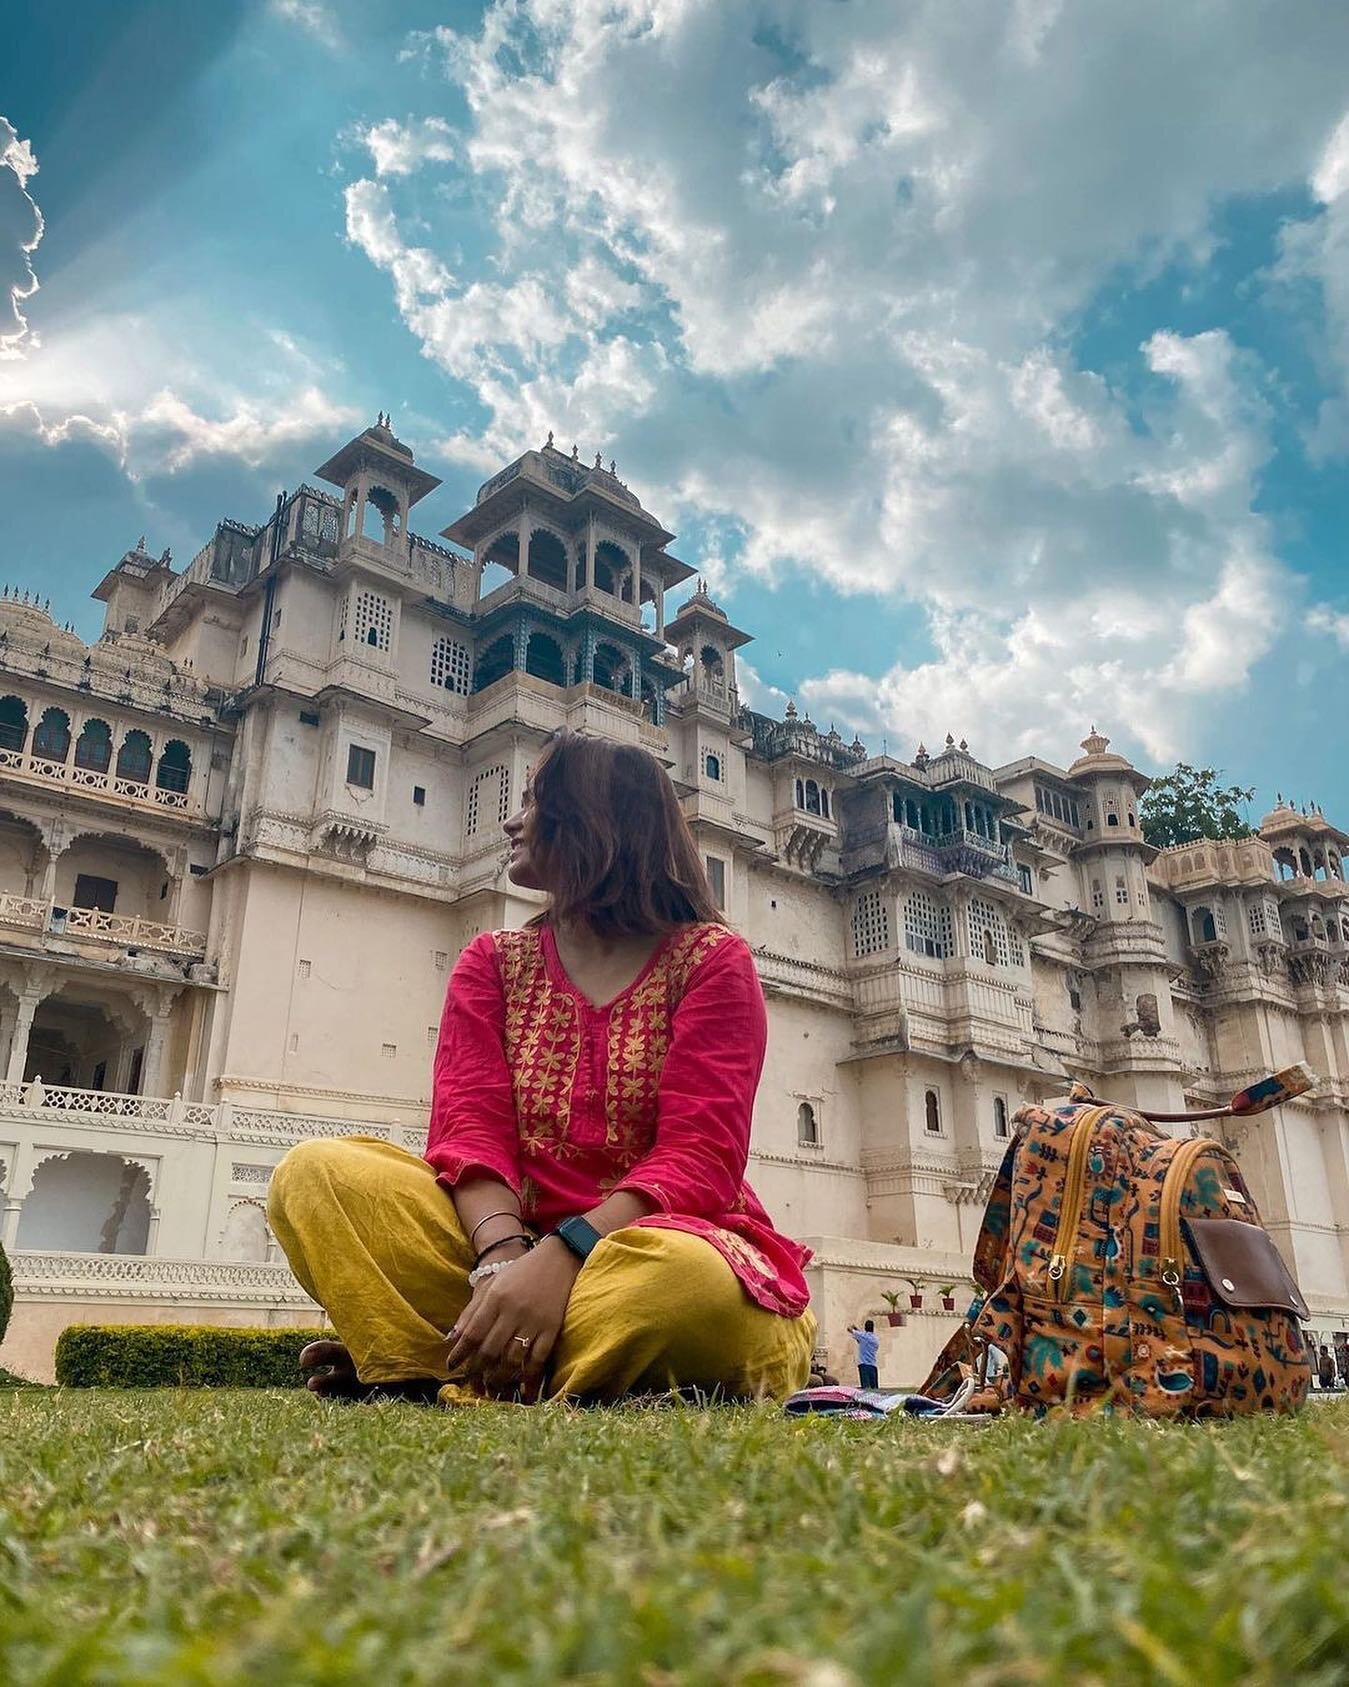 📸 @travelocorn

Have you ever considered studying abroad in India? Check out the link in @studyinindiagov 
.
.
.
.
.
#studyabroad #udiapur #thecityoflakes #asia #travel #india #travelgram #traveller #studyportals #beautifuldestinations #ThePassportP